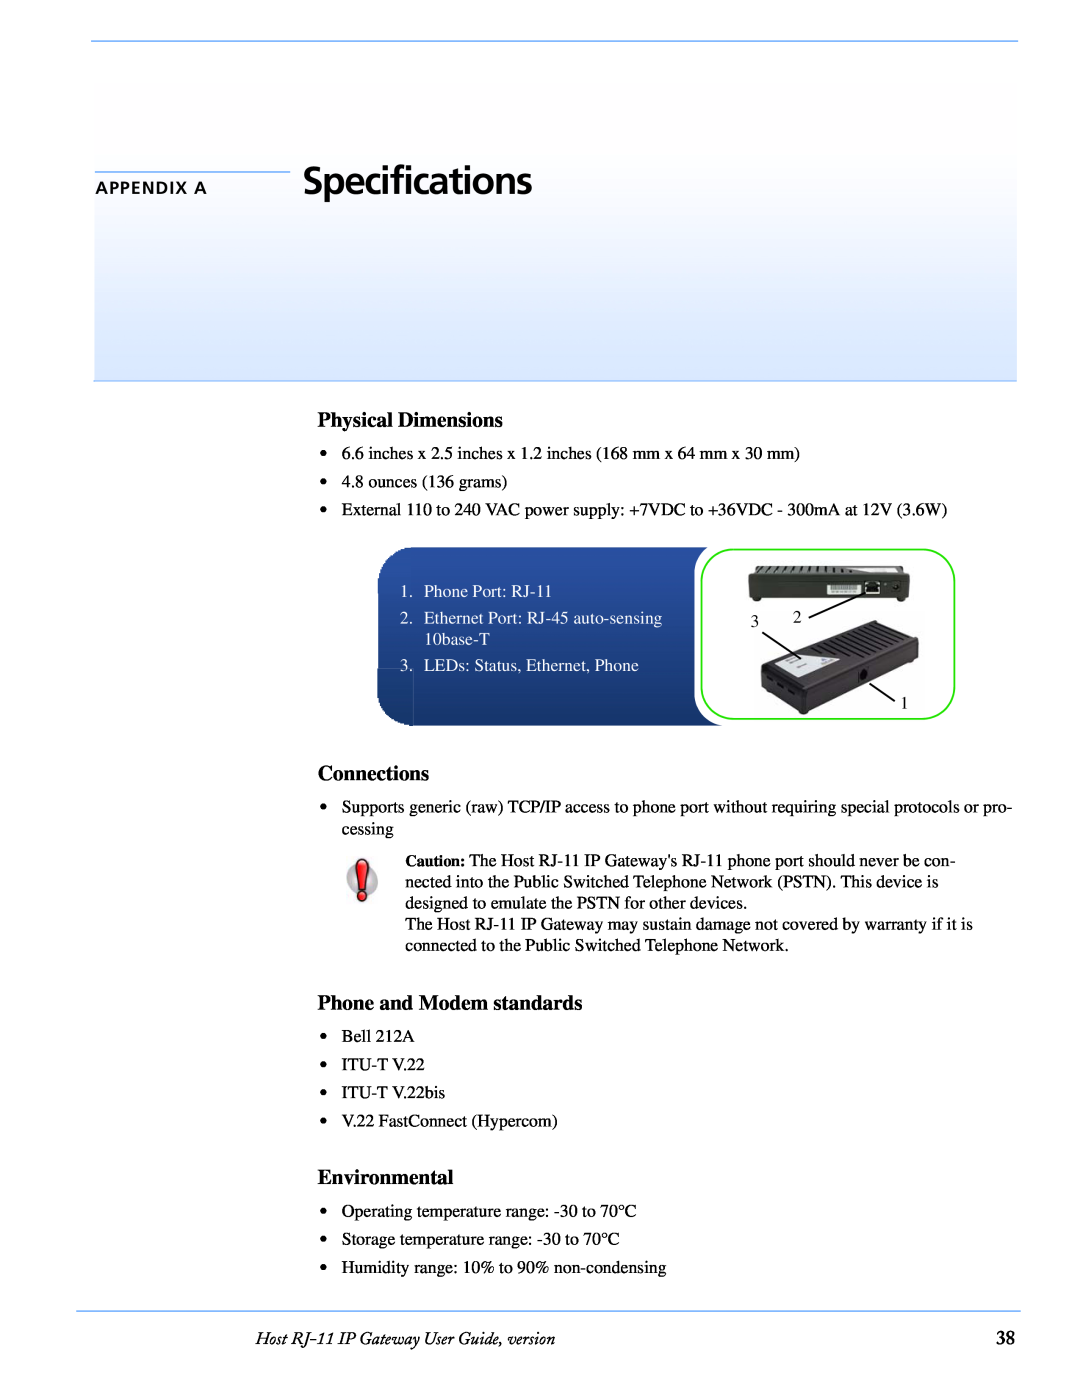 Airlink RJ-11 manual Specifications, Physical Dimensions, Connections, Phone and Modem standards, Environmental, Appendix A 